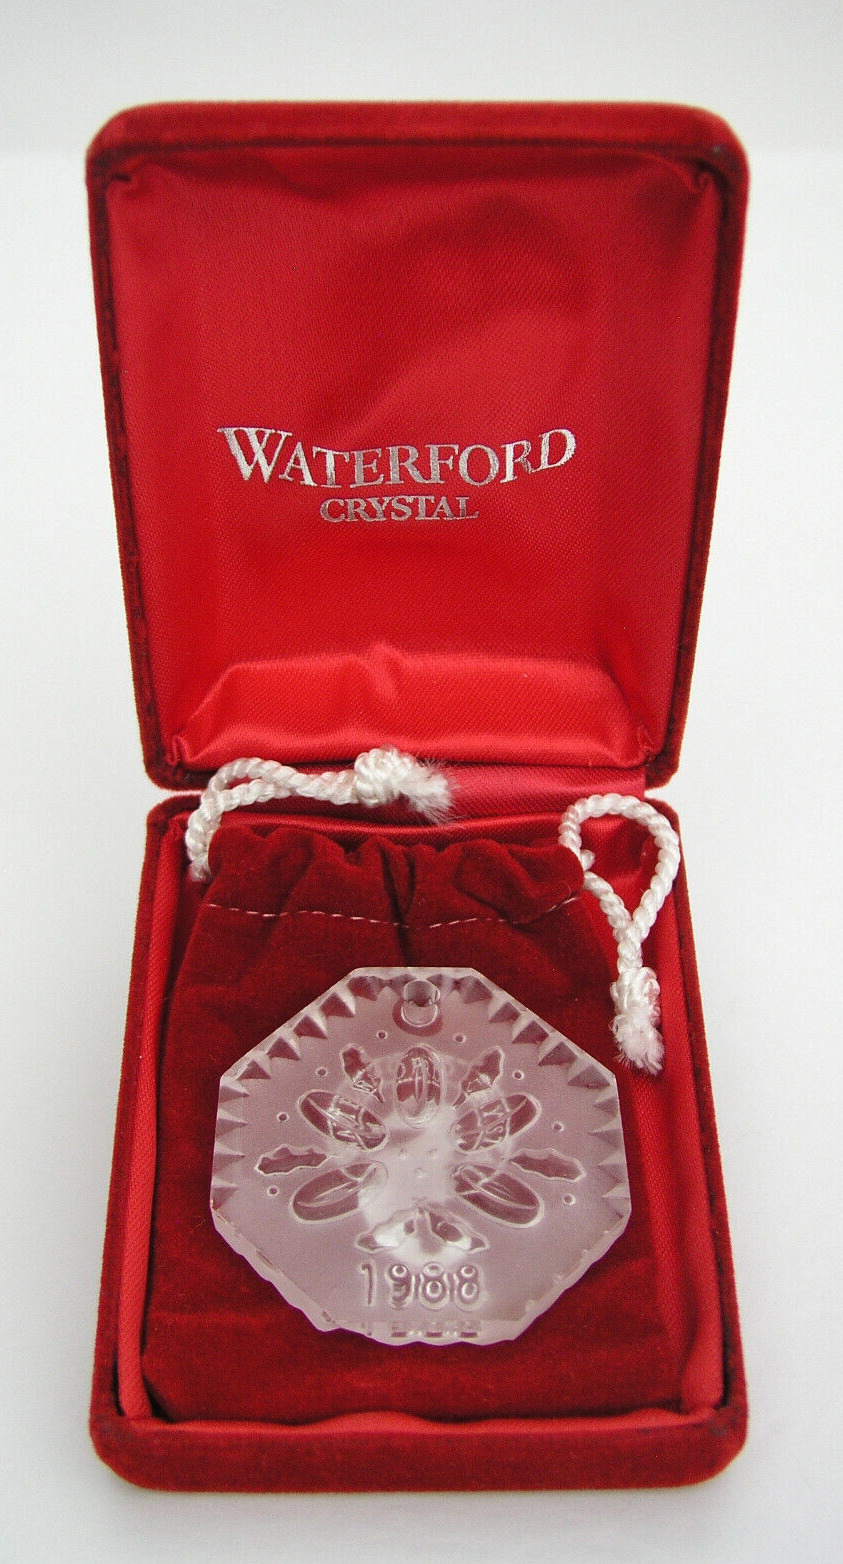 Vintage Waterford 5 Golden Rings Crystal Ornament 1988 12 Days Of Christmas